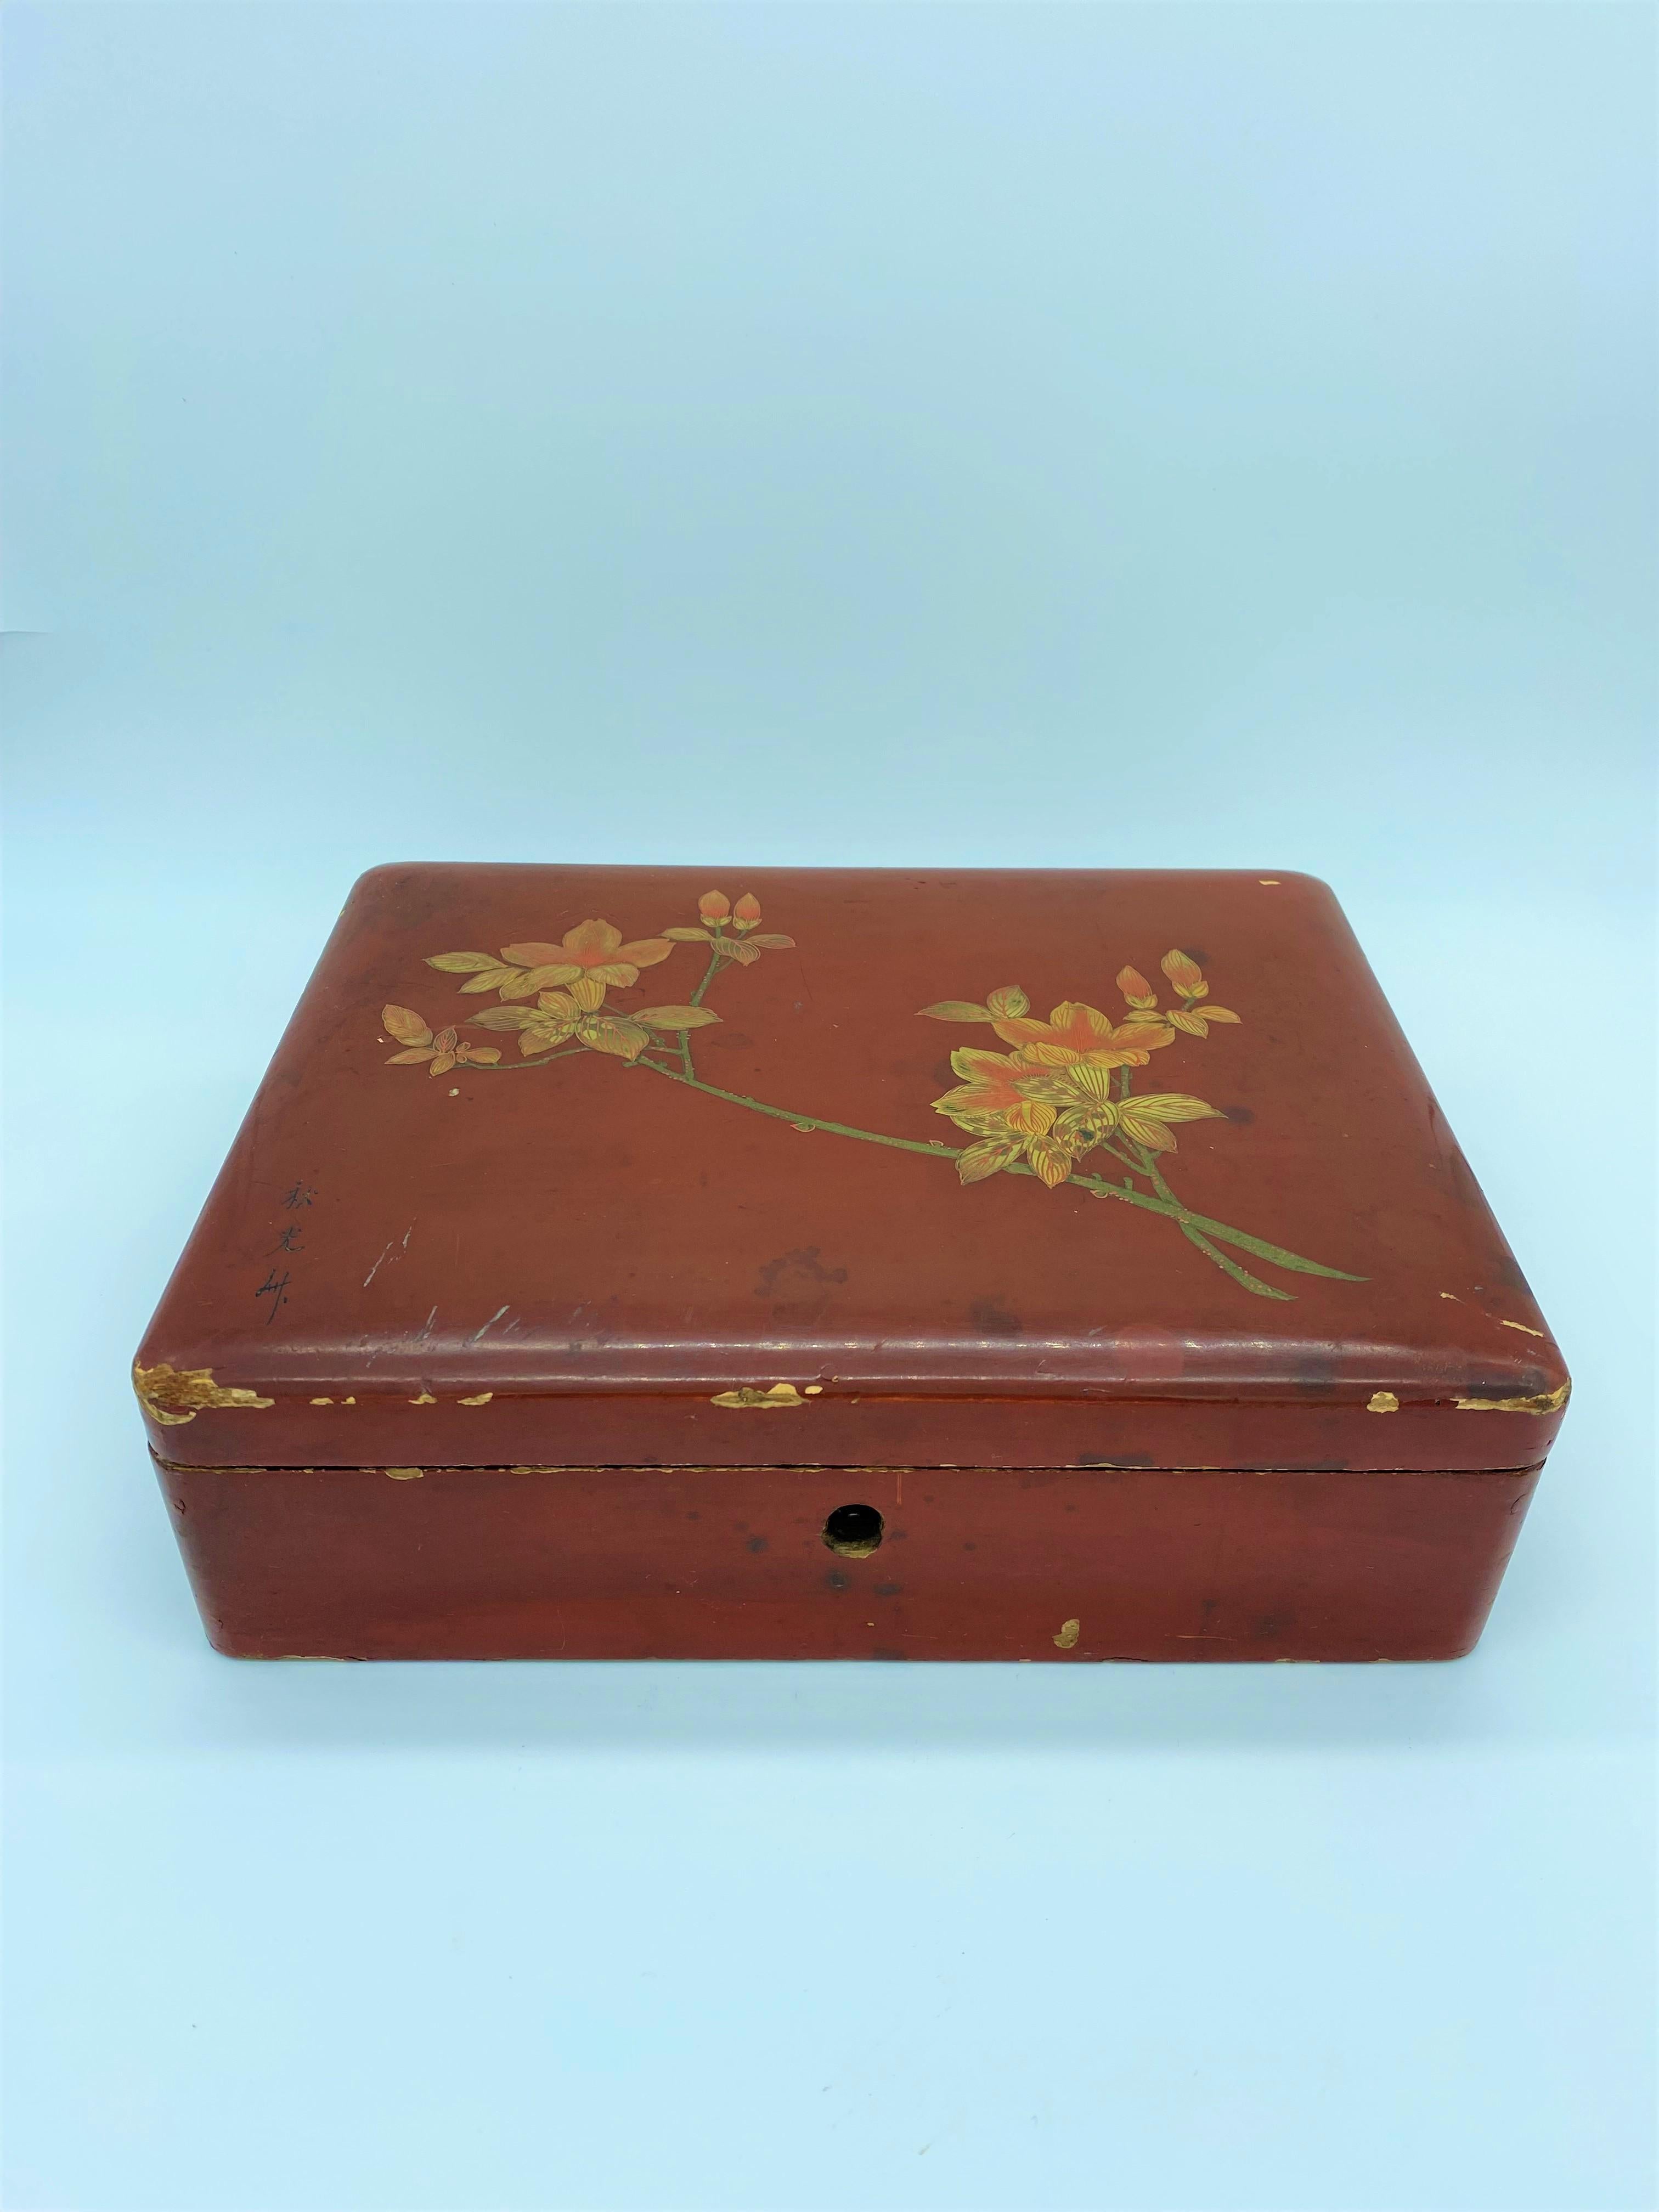 Beautiful Japanese box in red lacquered wood. The lid is decorated with flowering magnolia branches and signed by the artist. The inside of the box is covered with a paint loaded with gold glitter.
Japan Late 19th century.